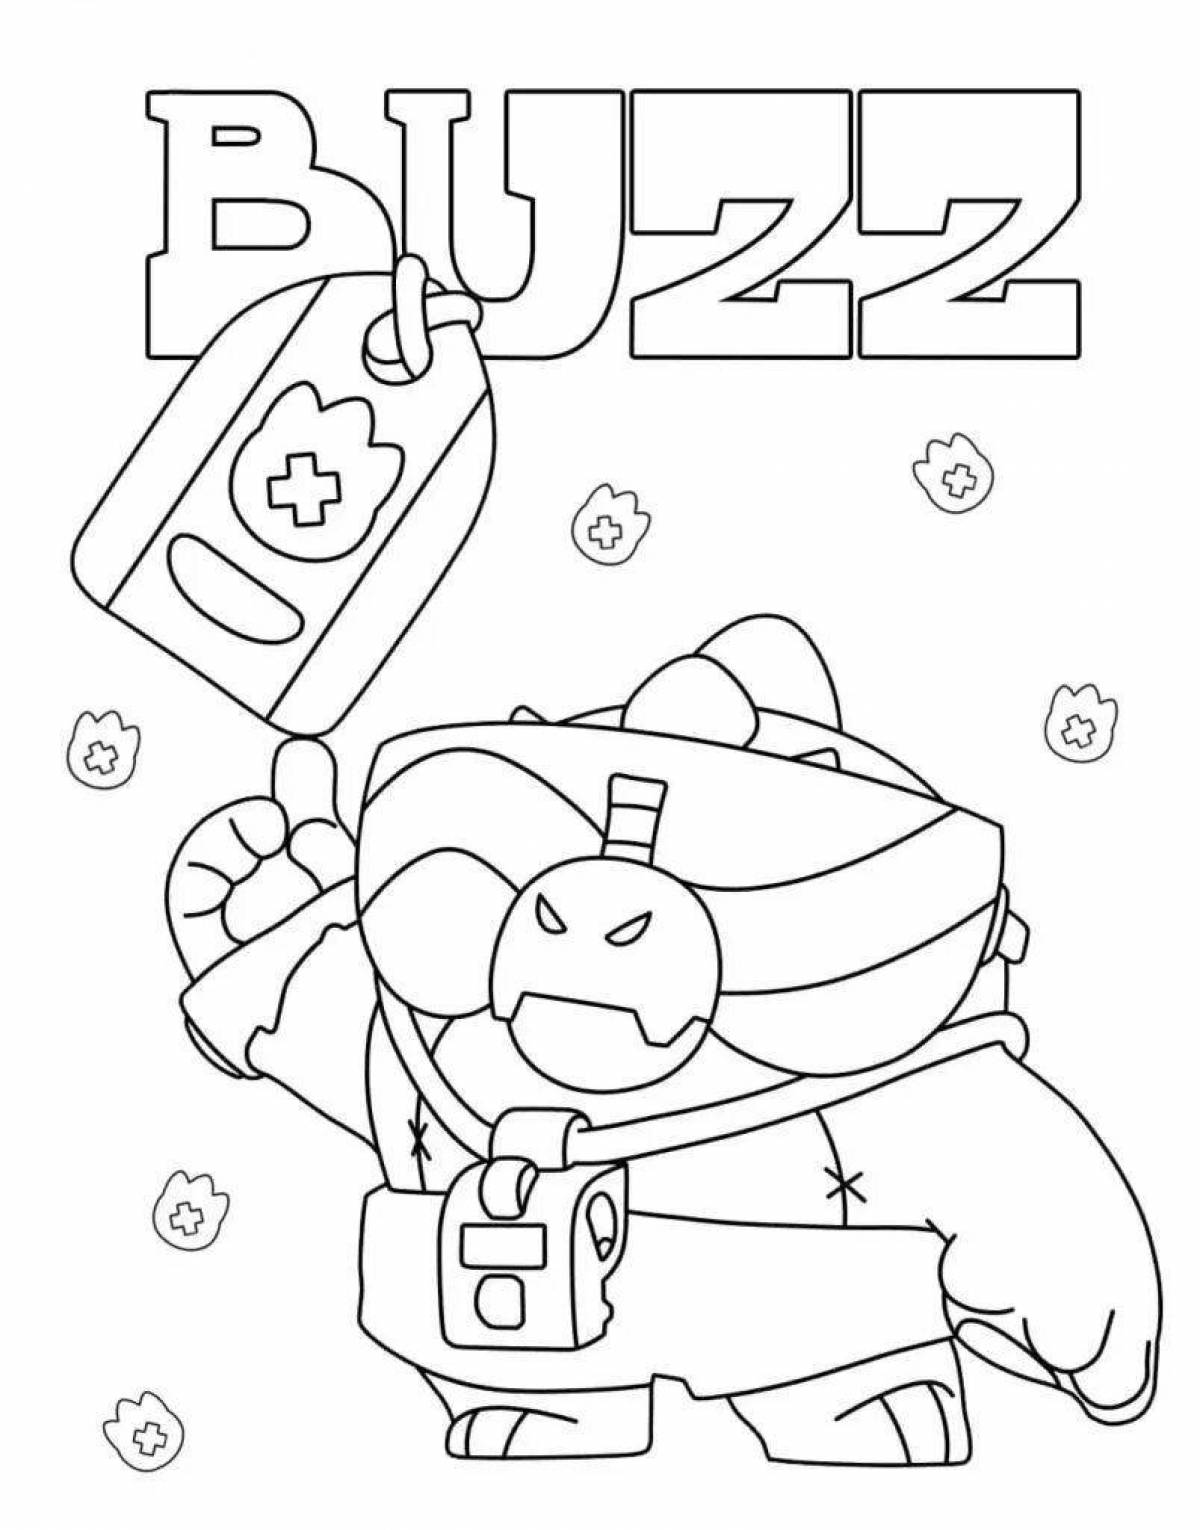 Great bravo stars major rico coloring pages